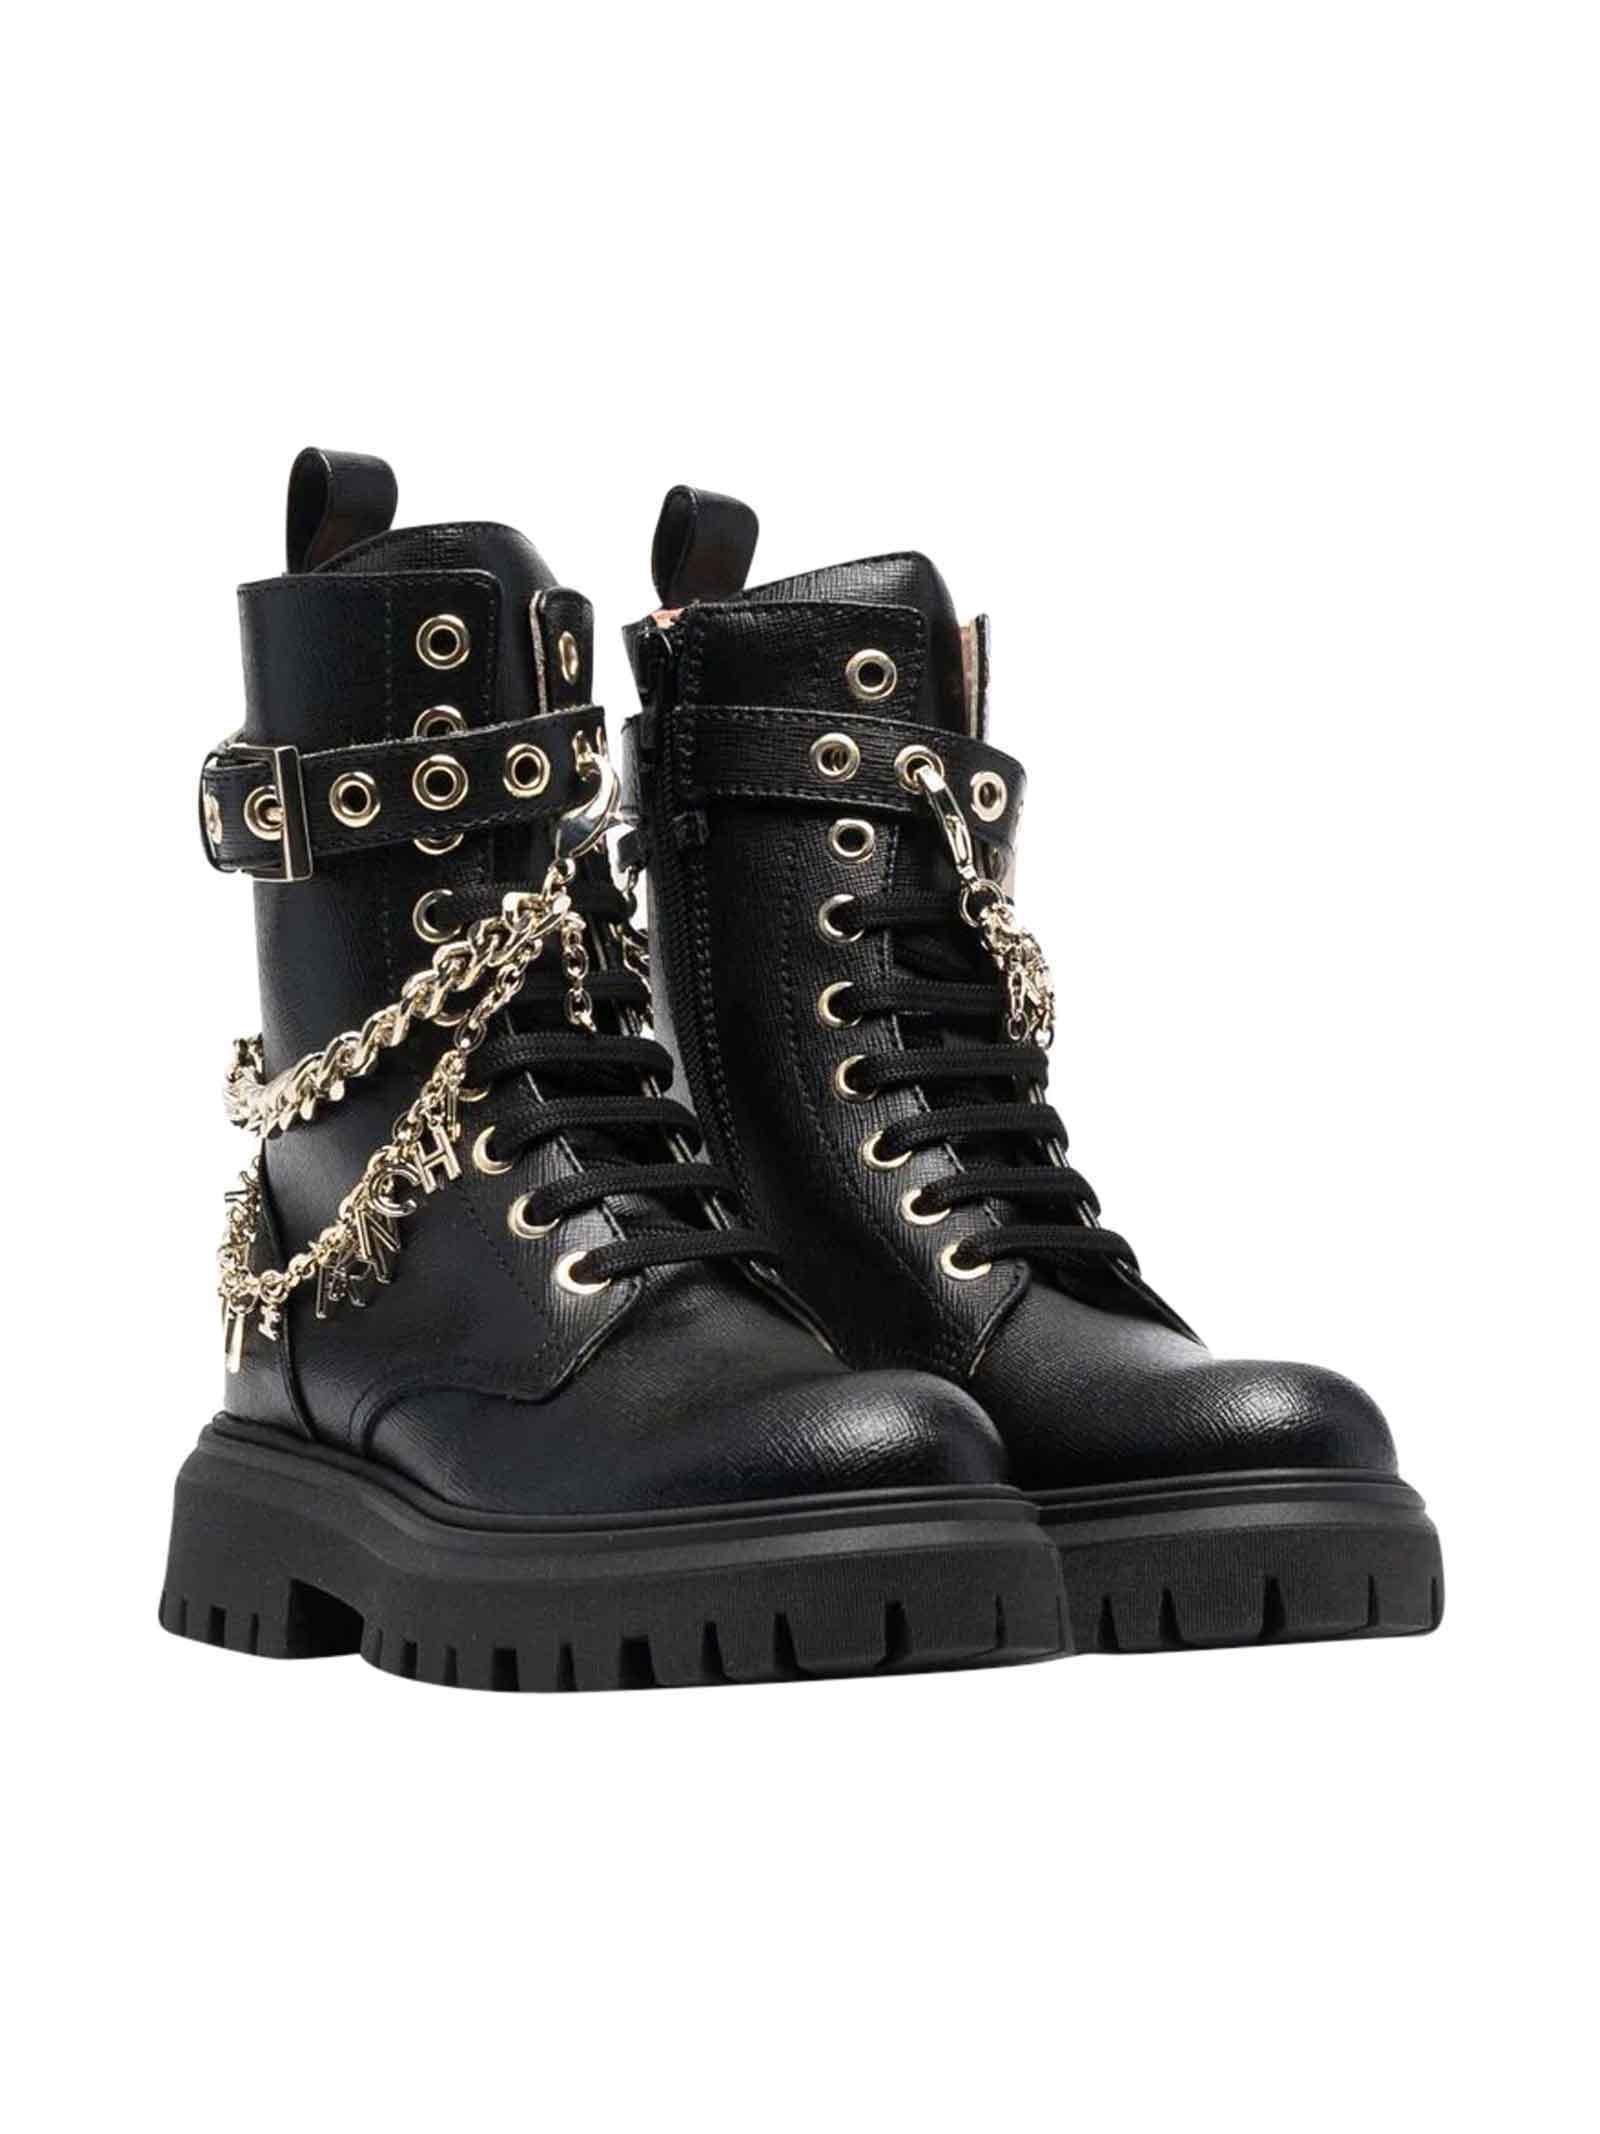 Elisabetta Franchi La Mia Bambina Black Teen Boots With Chains, Round Tip And Laces Kids